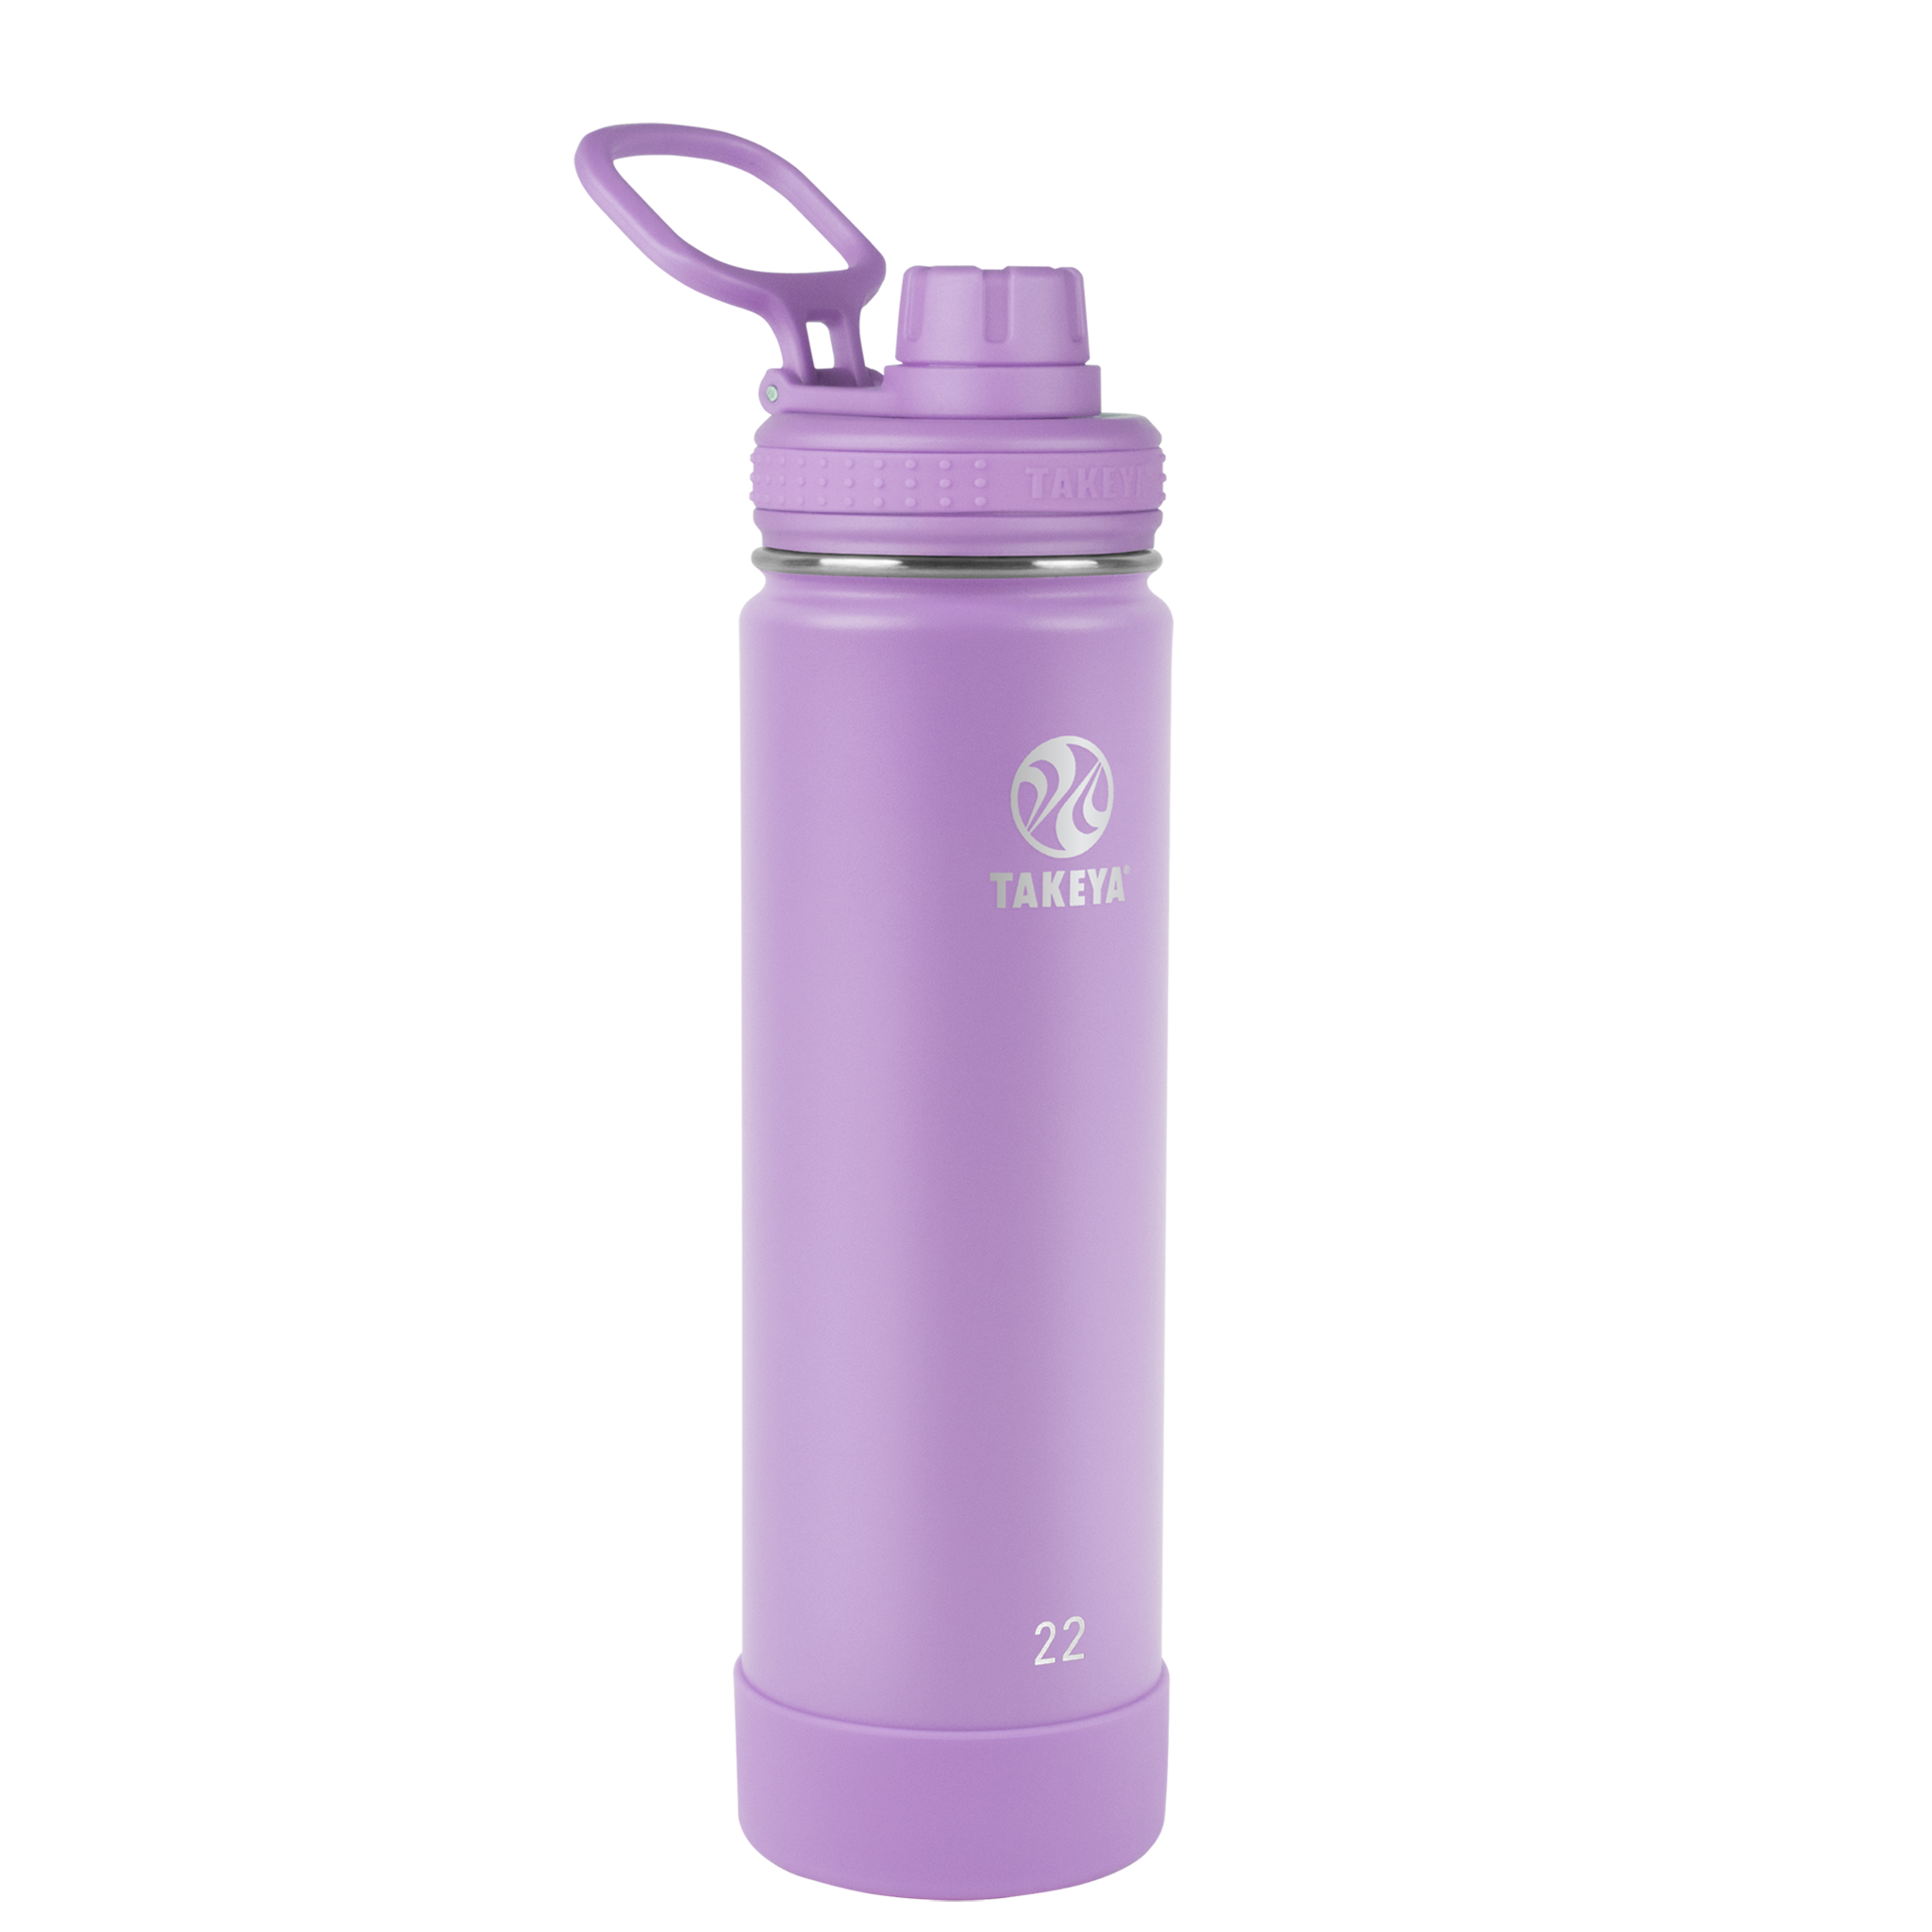 Takeya 24oz Actives Insulated Stainless Steel Water Bottle with Straw Lid -  Lilac